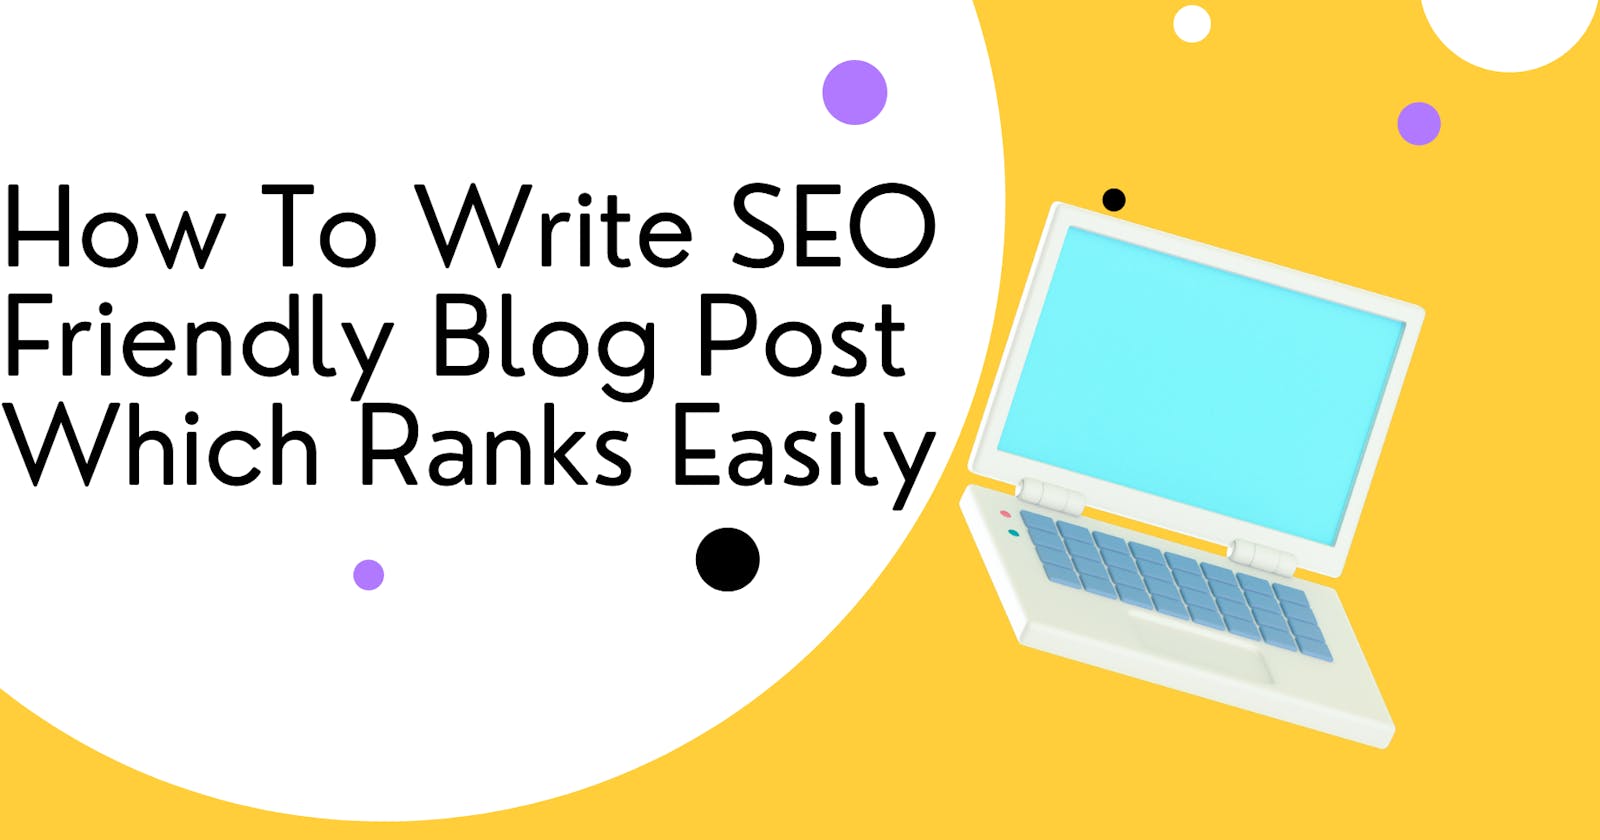 How To Write SEO Friendly Blog Post Which Ranks Easily.